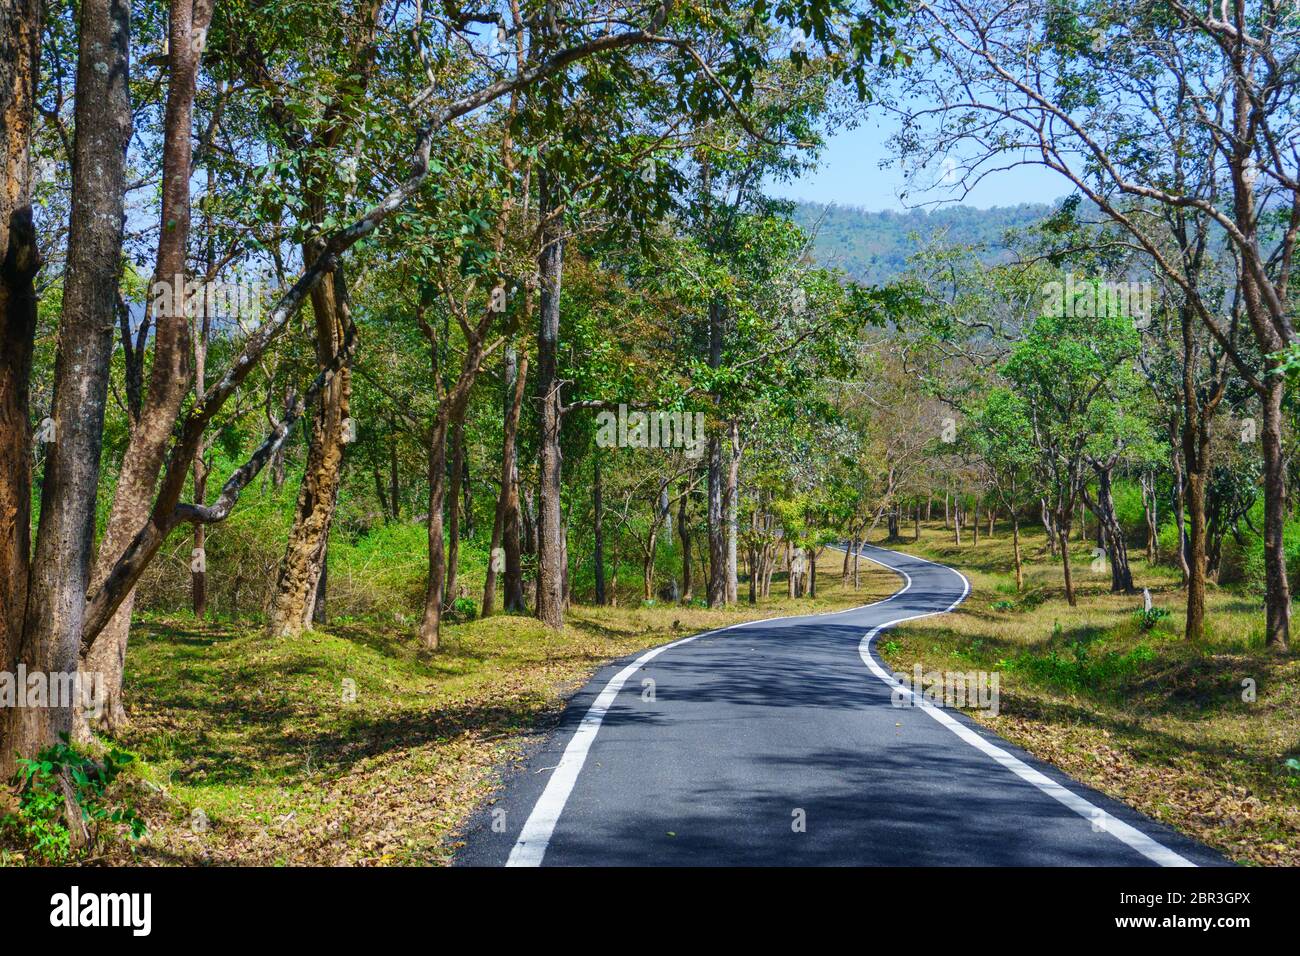 A beautiful road winding its way through a forest (photographed in BR Hills Sanctuary, Karnataka, India) Stock Photo